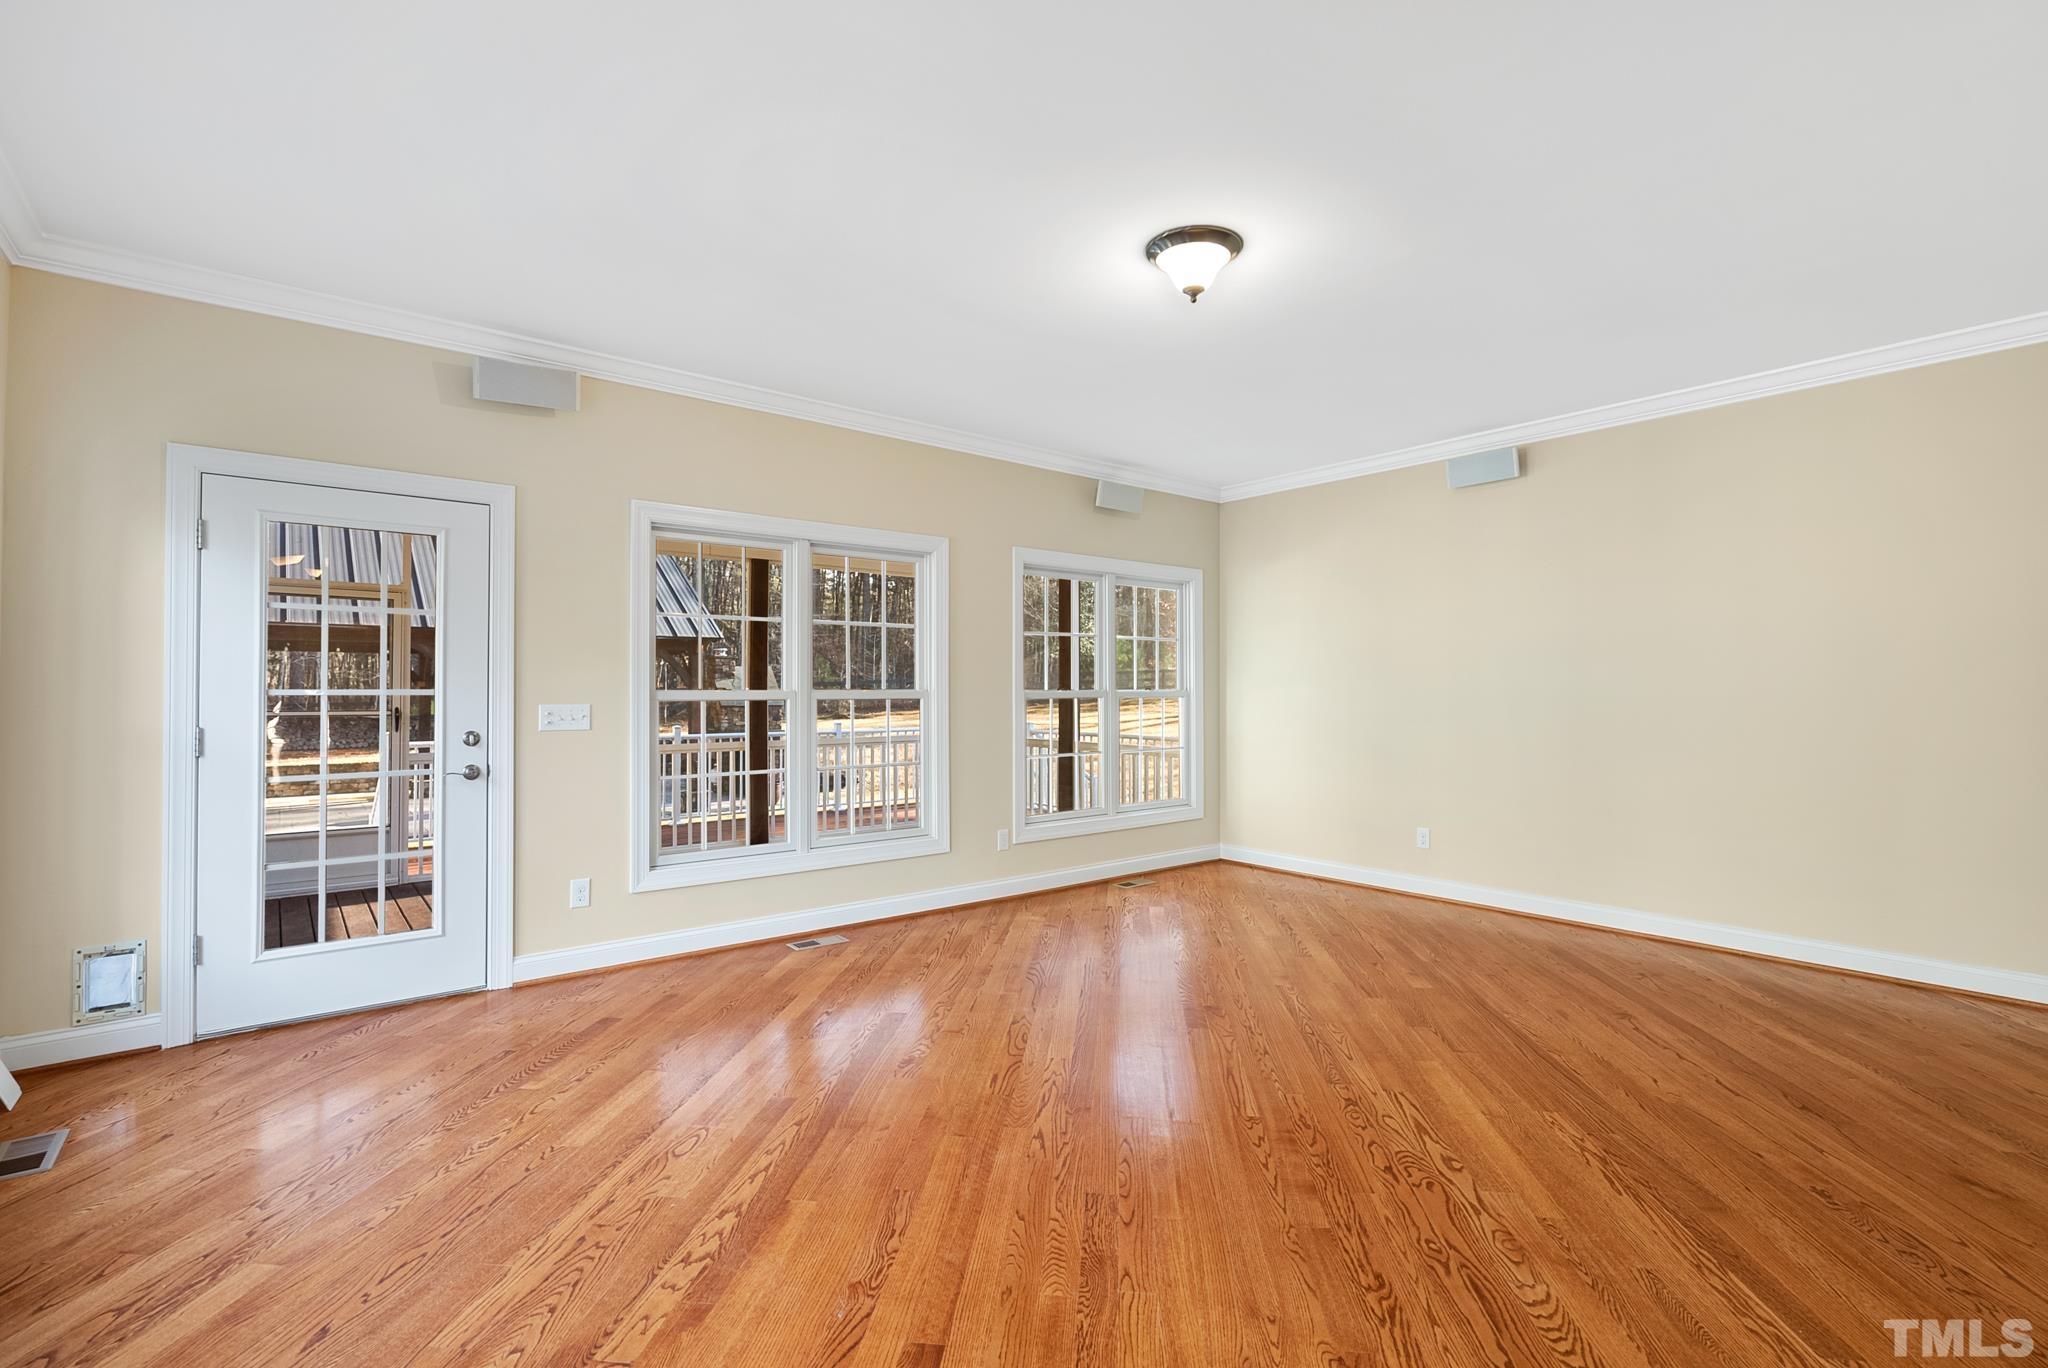 Wonderful large room adjoining kitchen area with door to screened porch and wall of windows.